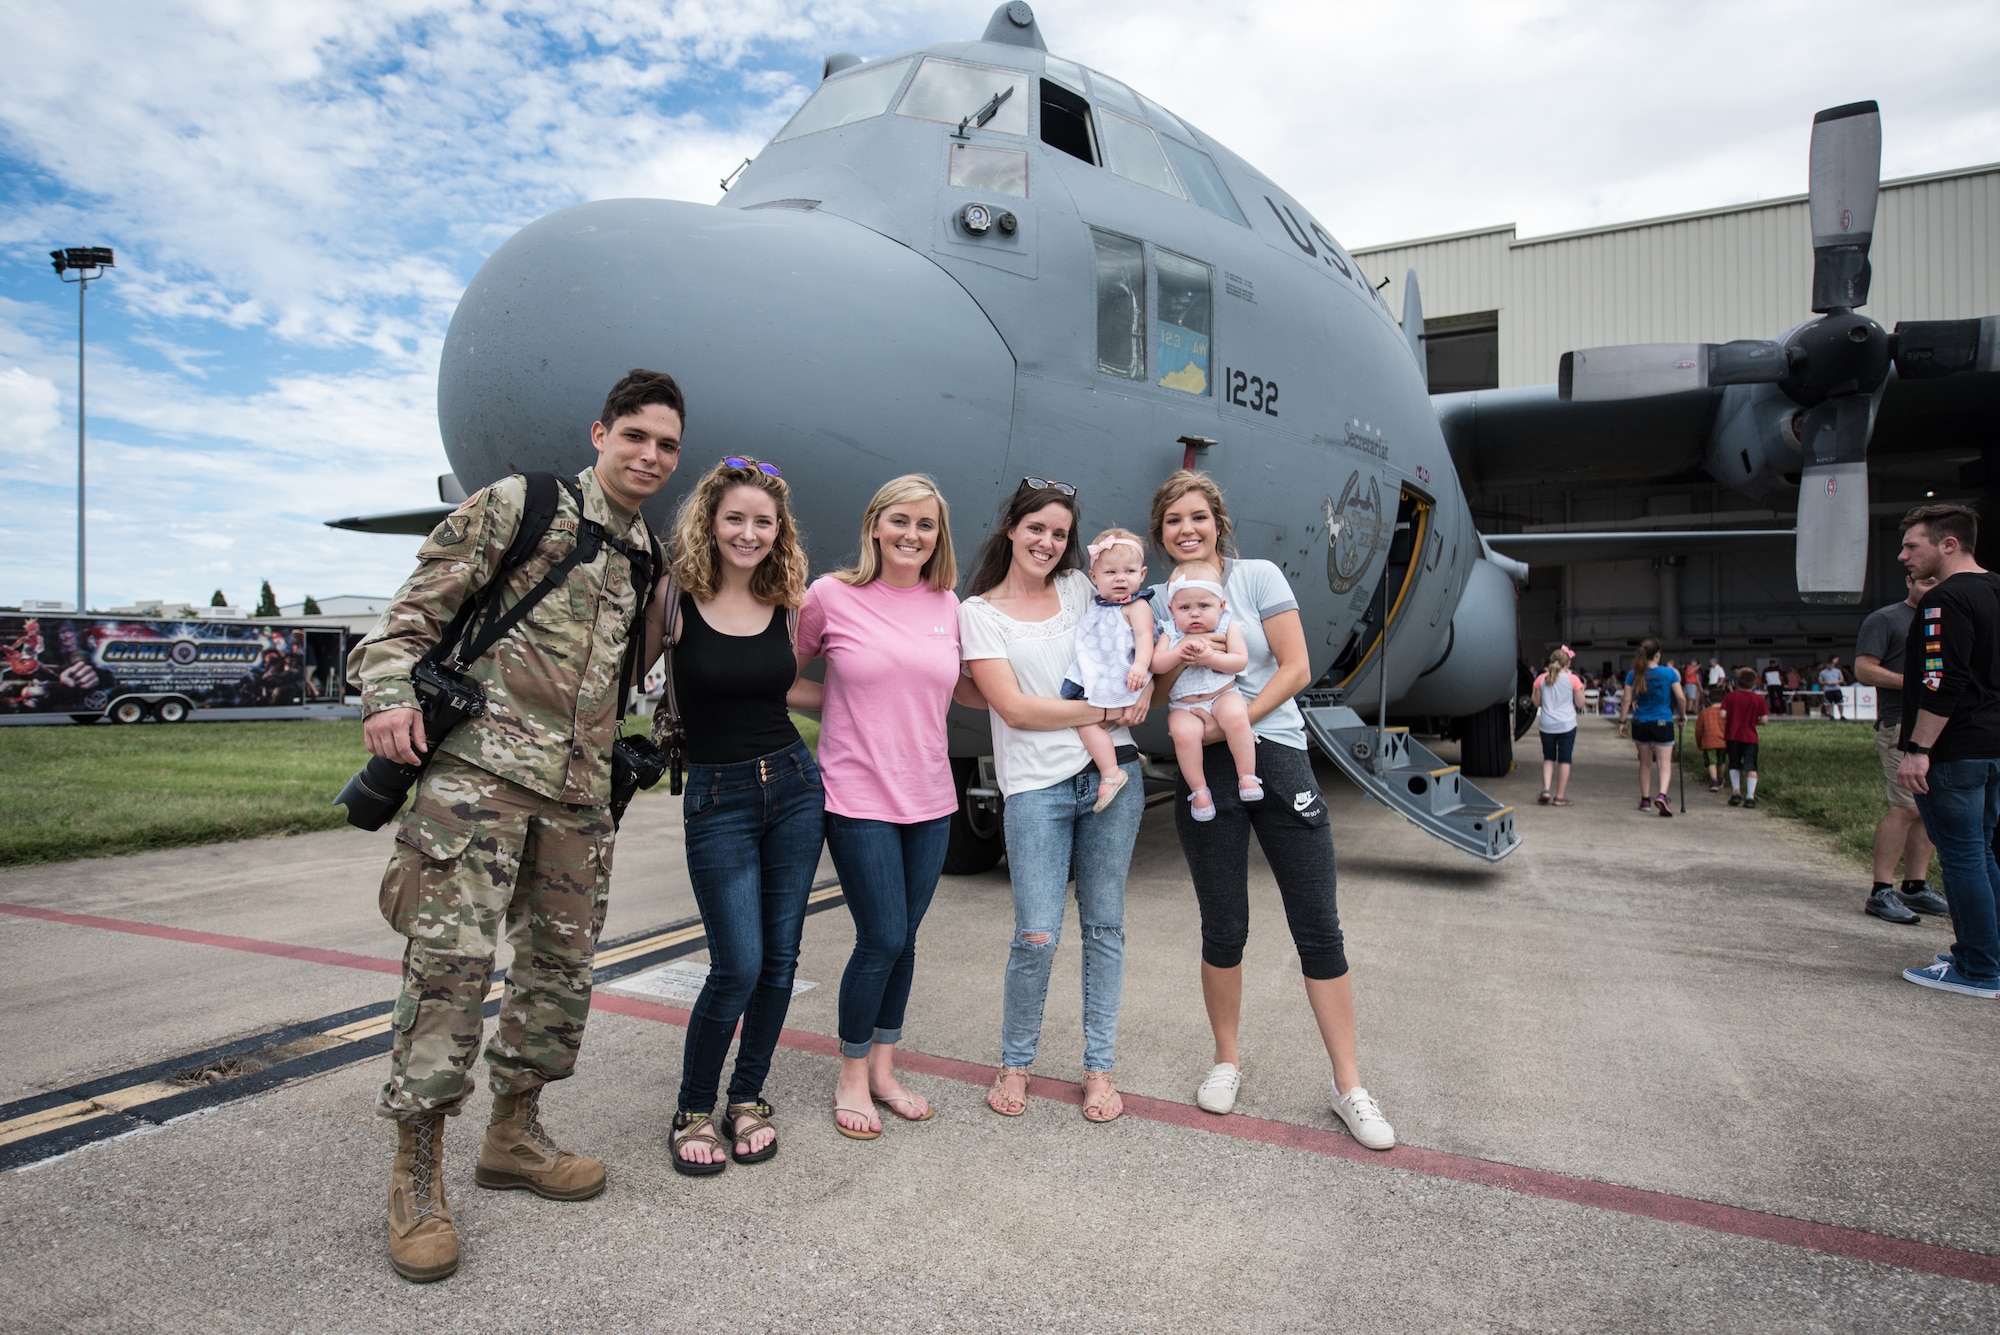 Family and friends pose in front of a 123rd Airlift Wing C-130 Hercules aircraft during Family Day at the Kentucky Air National Guard Base in Louisville, Ky., Sept. 16, 2018. The event, which drew a crowd of more than 1,000 people, featured lunch, games, a car show and numerous other activities. (U.S. Air National Guard photo by Master Sgt. Phil Speck)